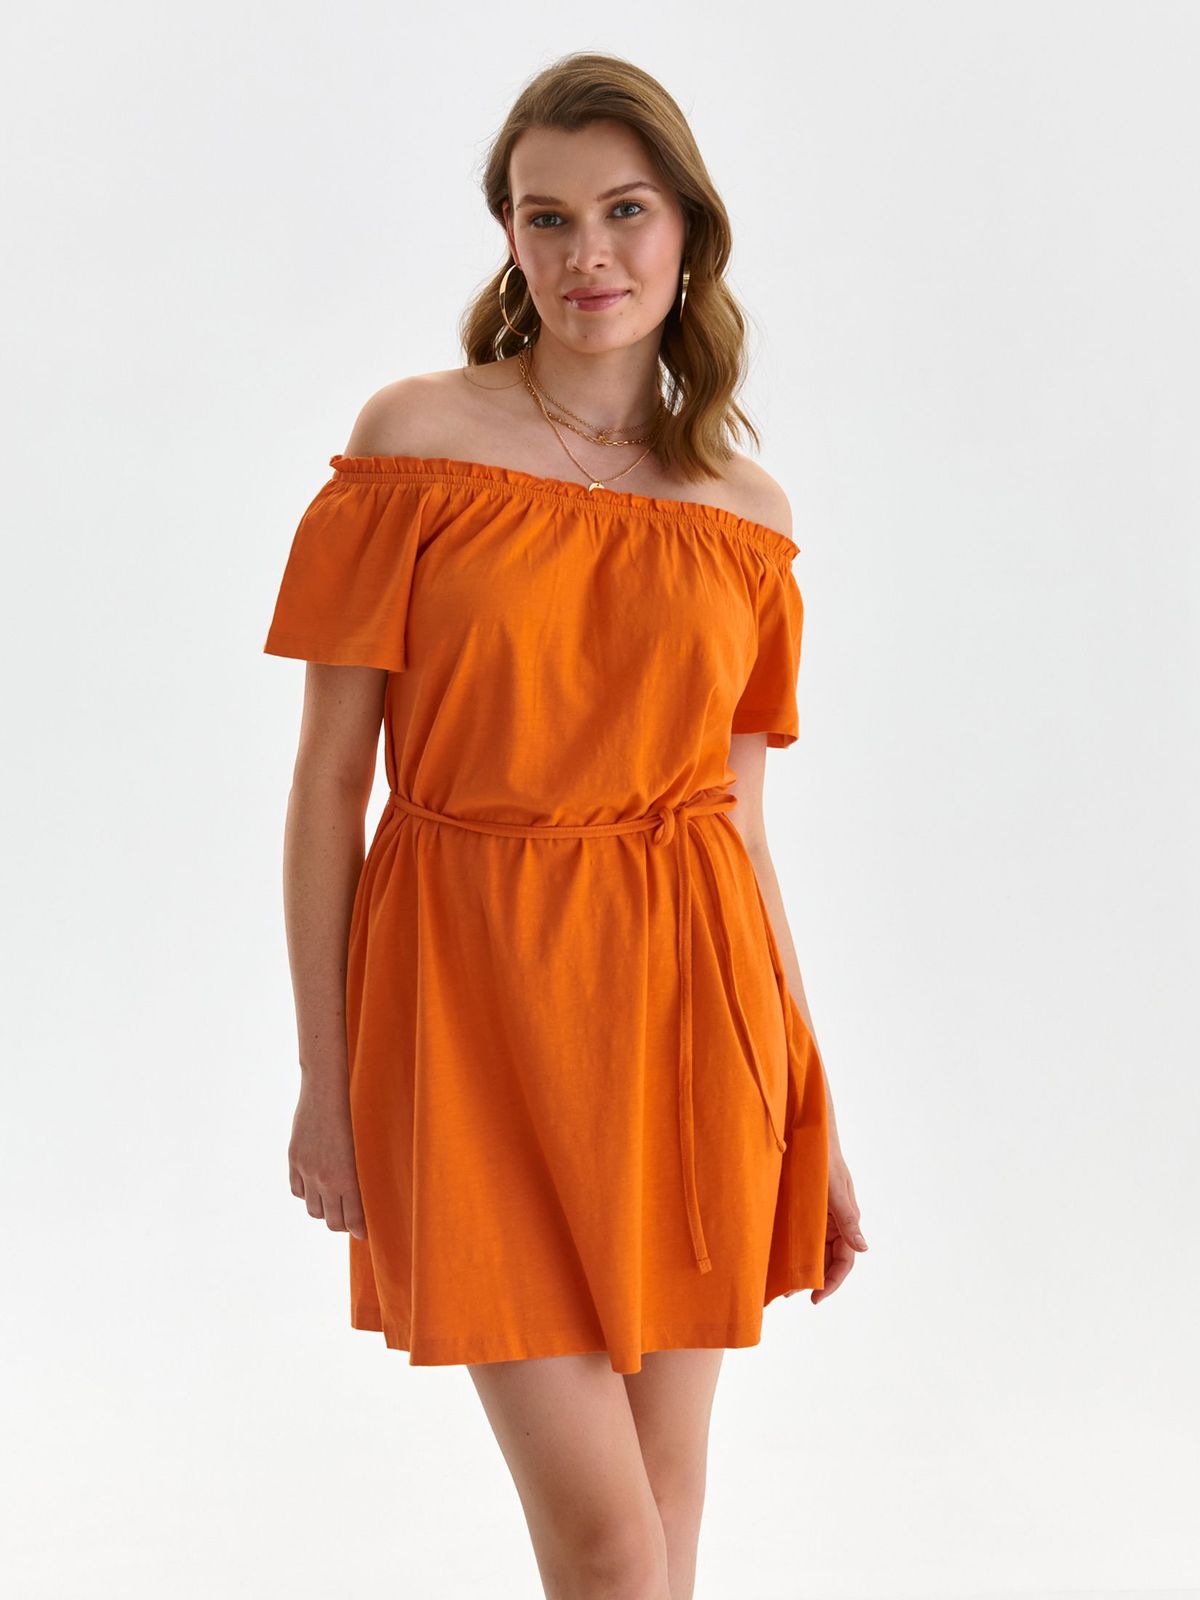 Orange dress short cut loose fit accessorized with tied waistband naked shoulders light material